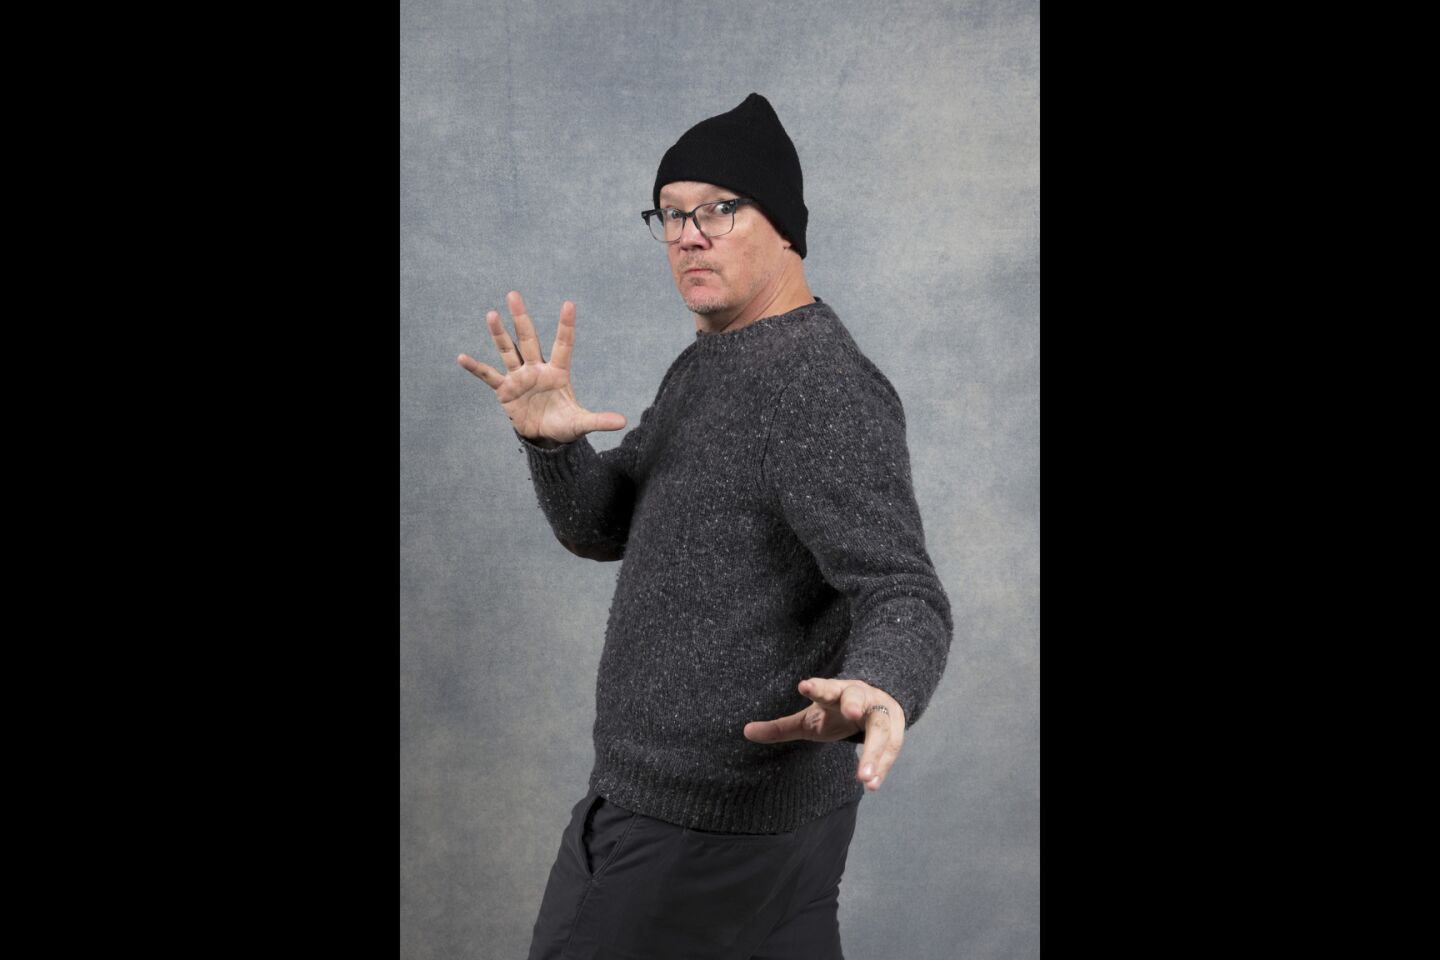 Actor Matthew Lillard, from the film "Halfway There," photographed in the L.A. Times Studio at Chase Sapphire on Main, during the Sundance Film Festival in Park City, Utah, Jan. 22, 2018. (Jay L. Clendenin / Los Angeles Times)